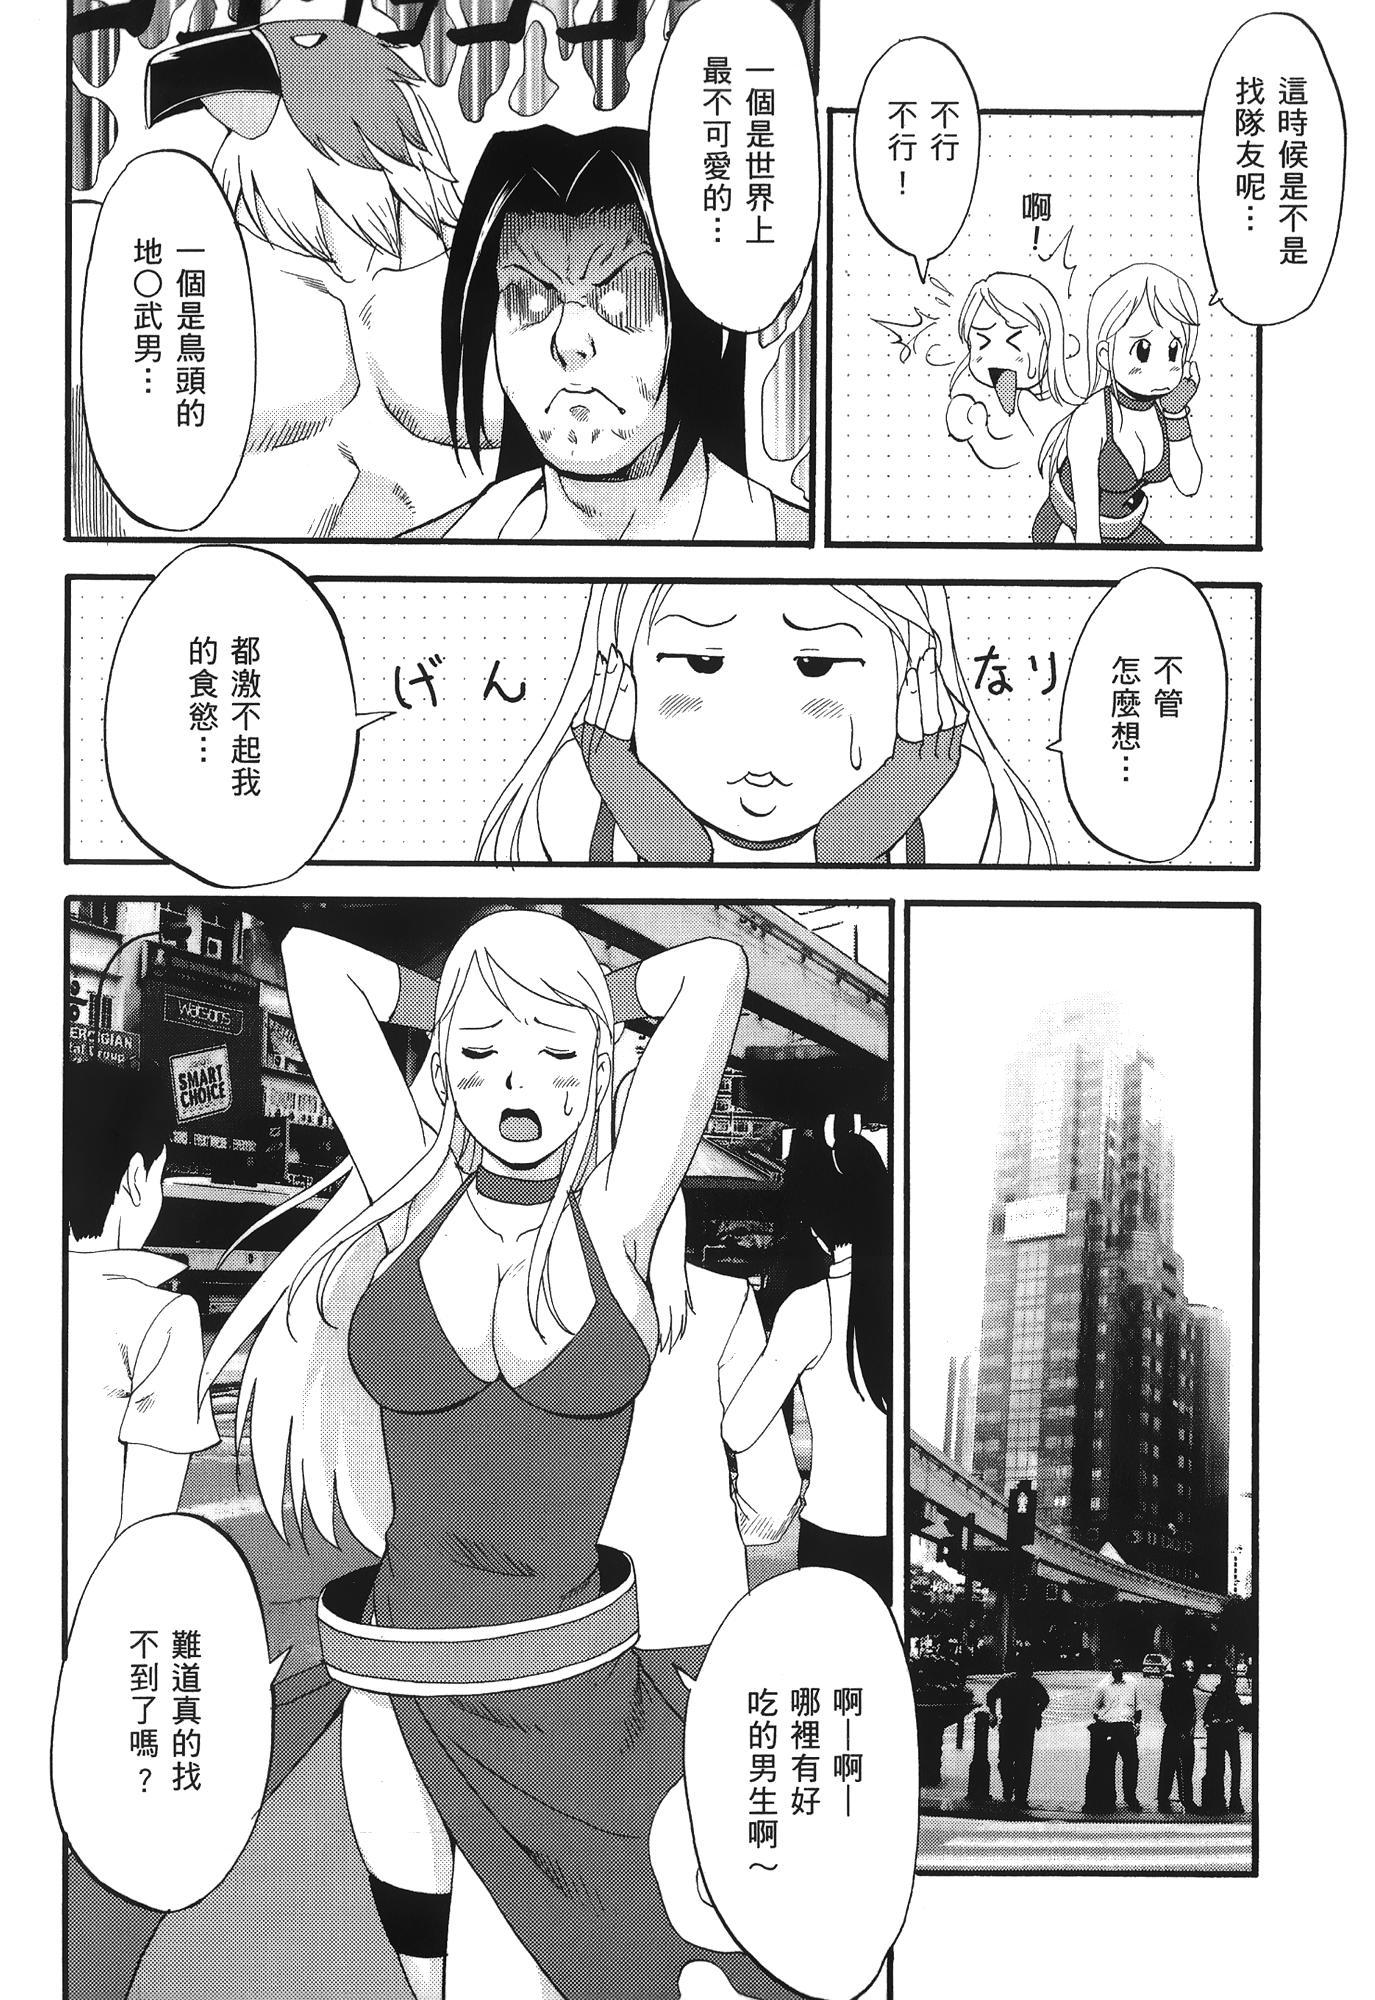 Chat [Saigado] THE YURI & FRIENDS 6 (King of Fighters) | 武鬥美少女 [Chinese] - King of fighters French - Page 3